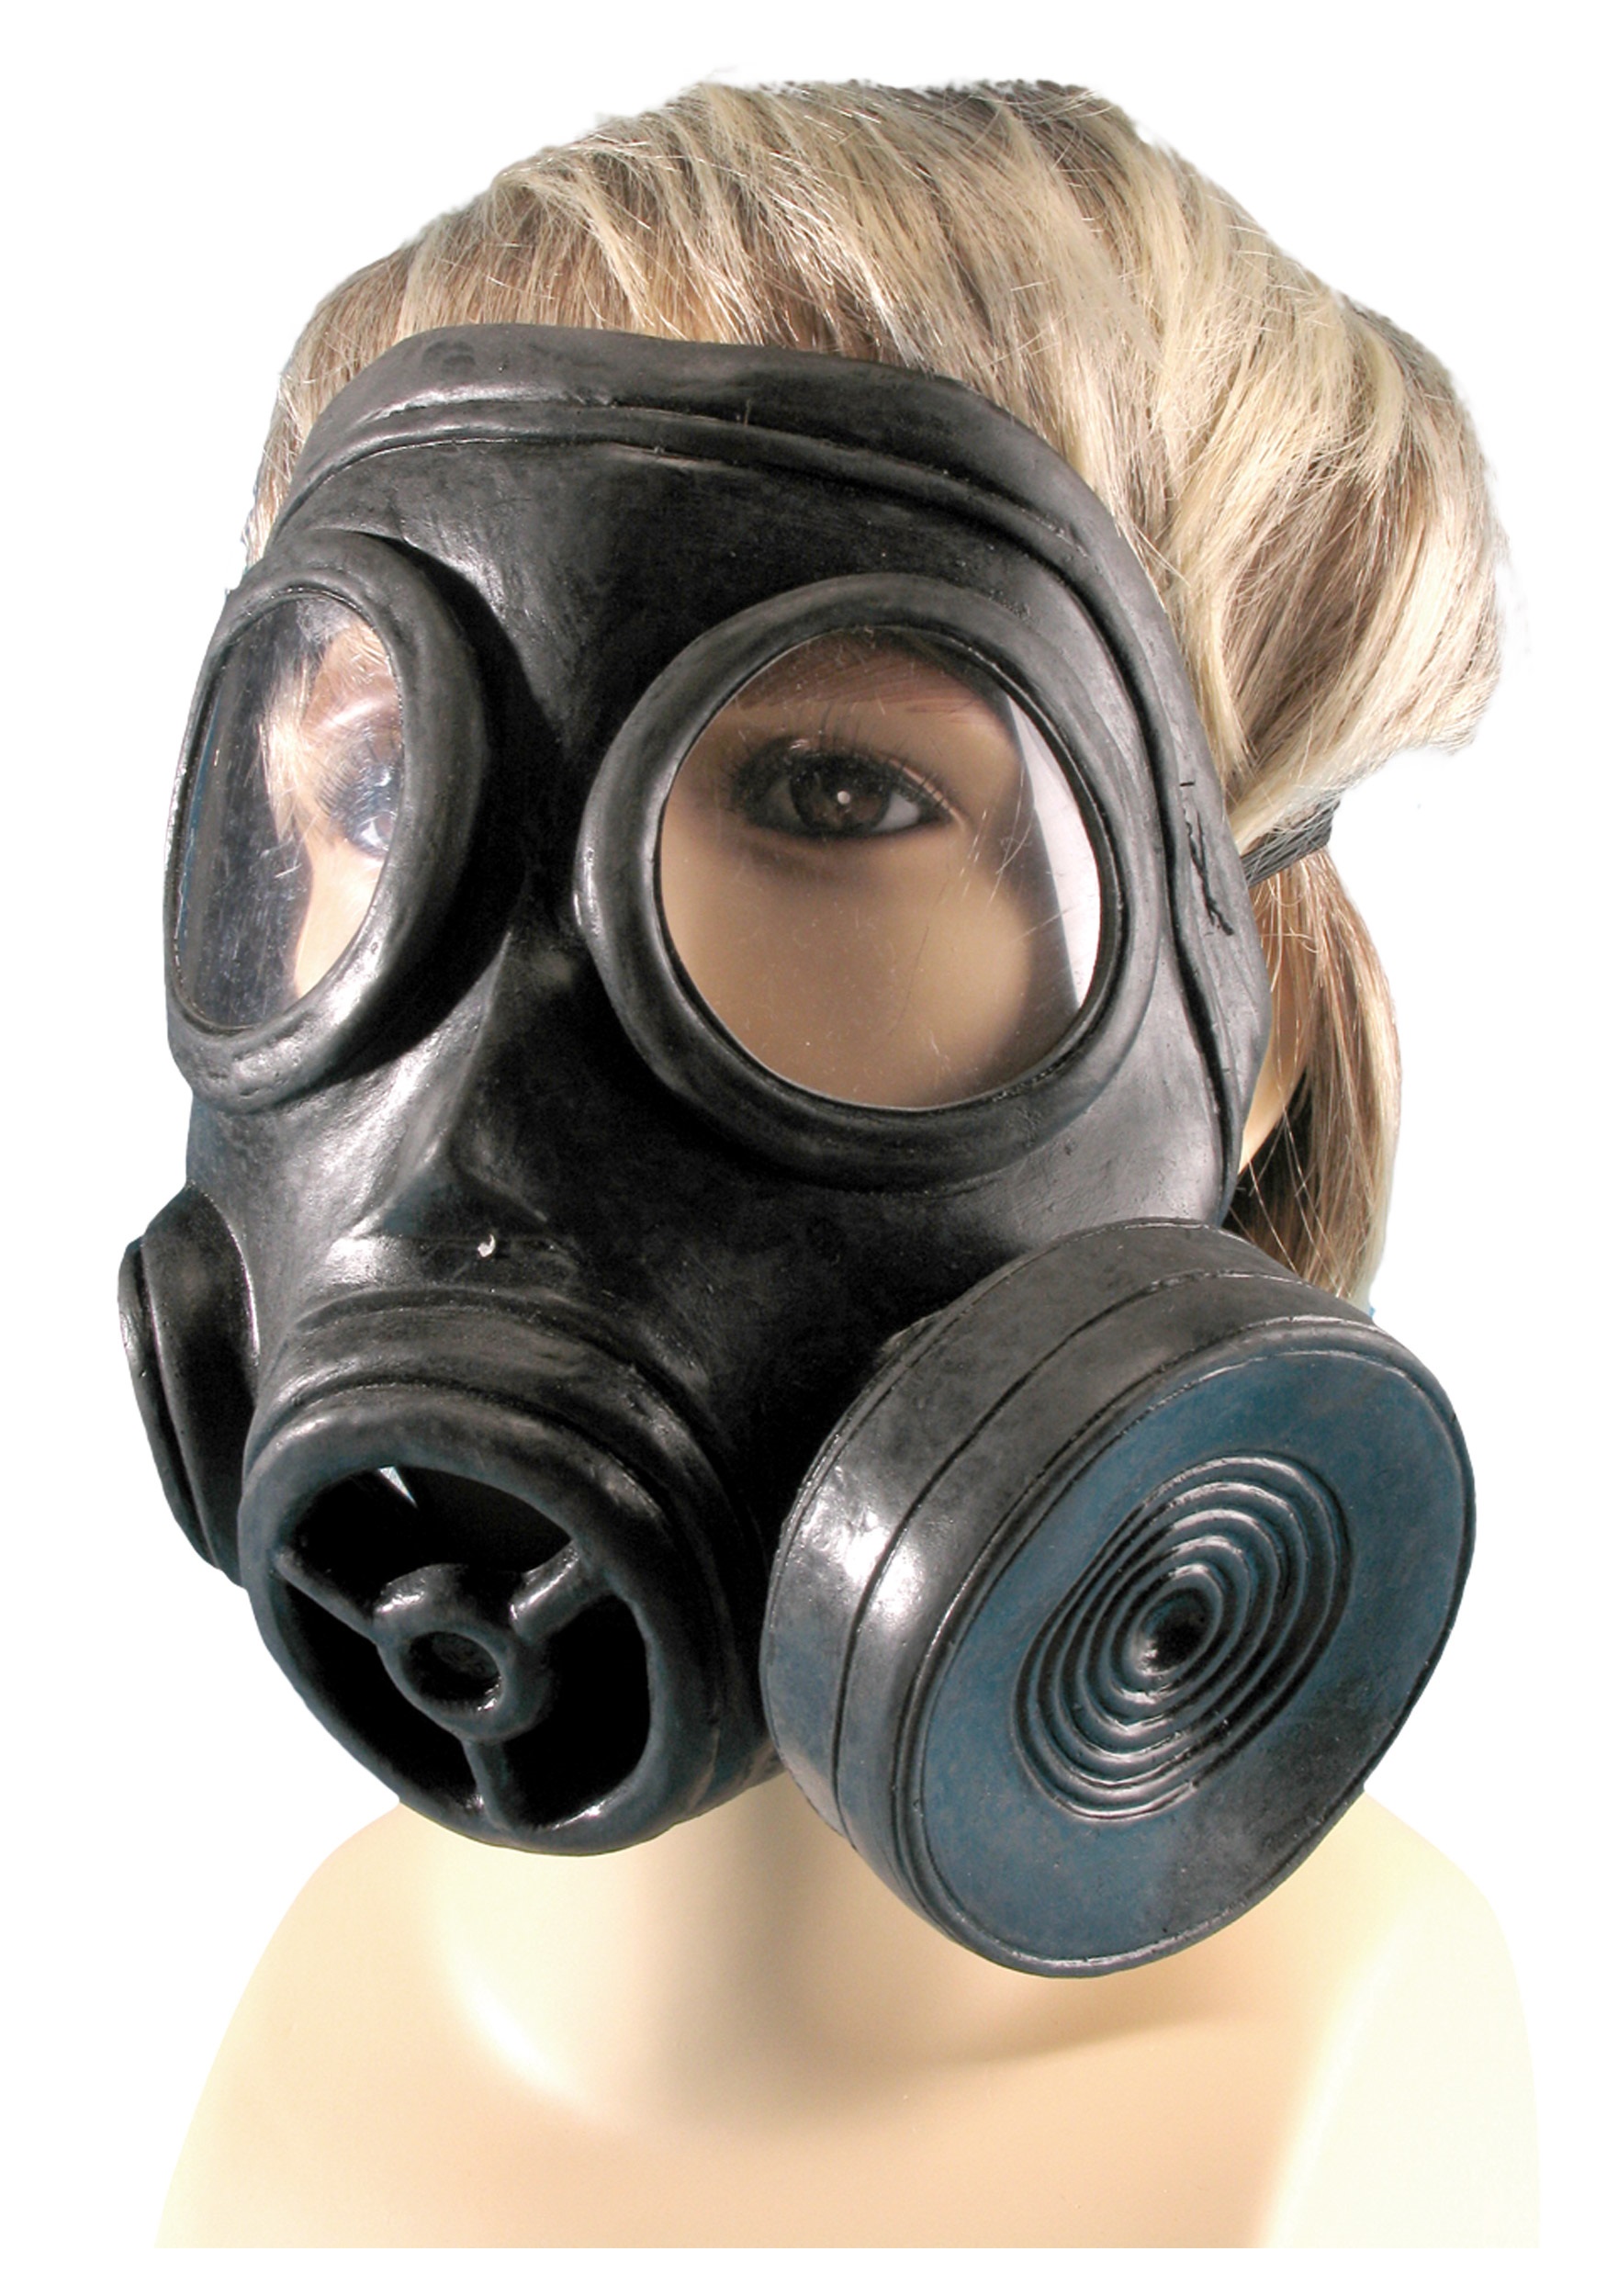 Toy Gas Mask